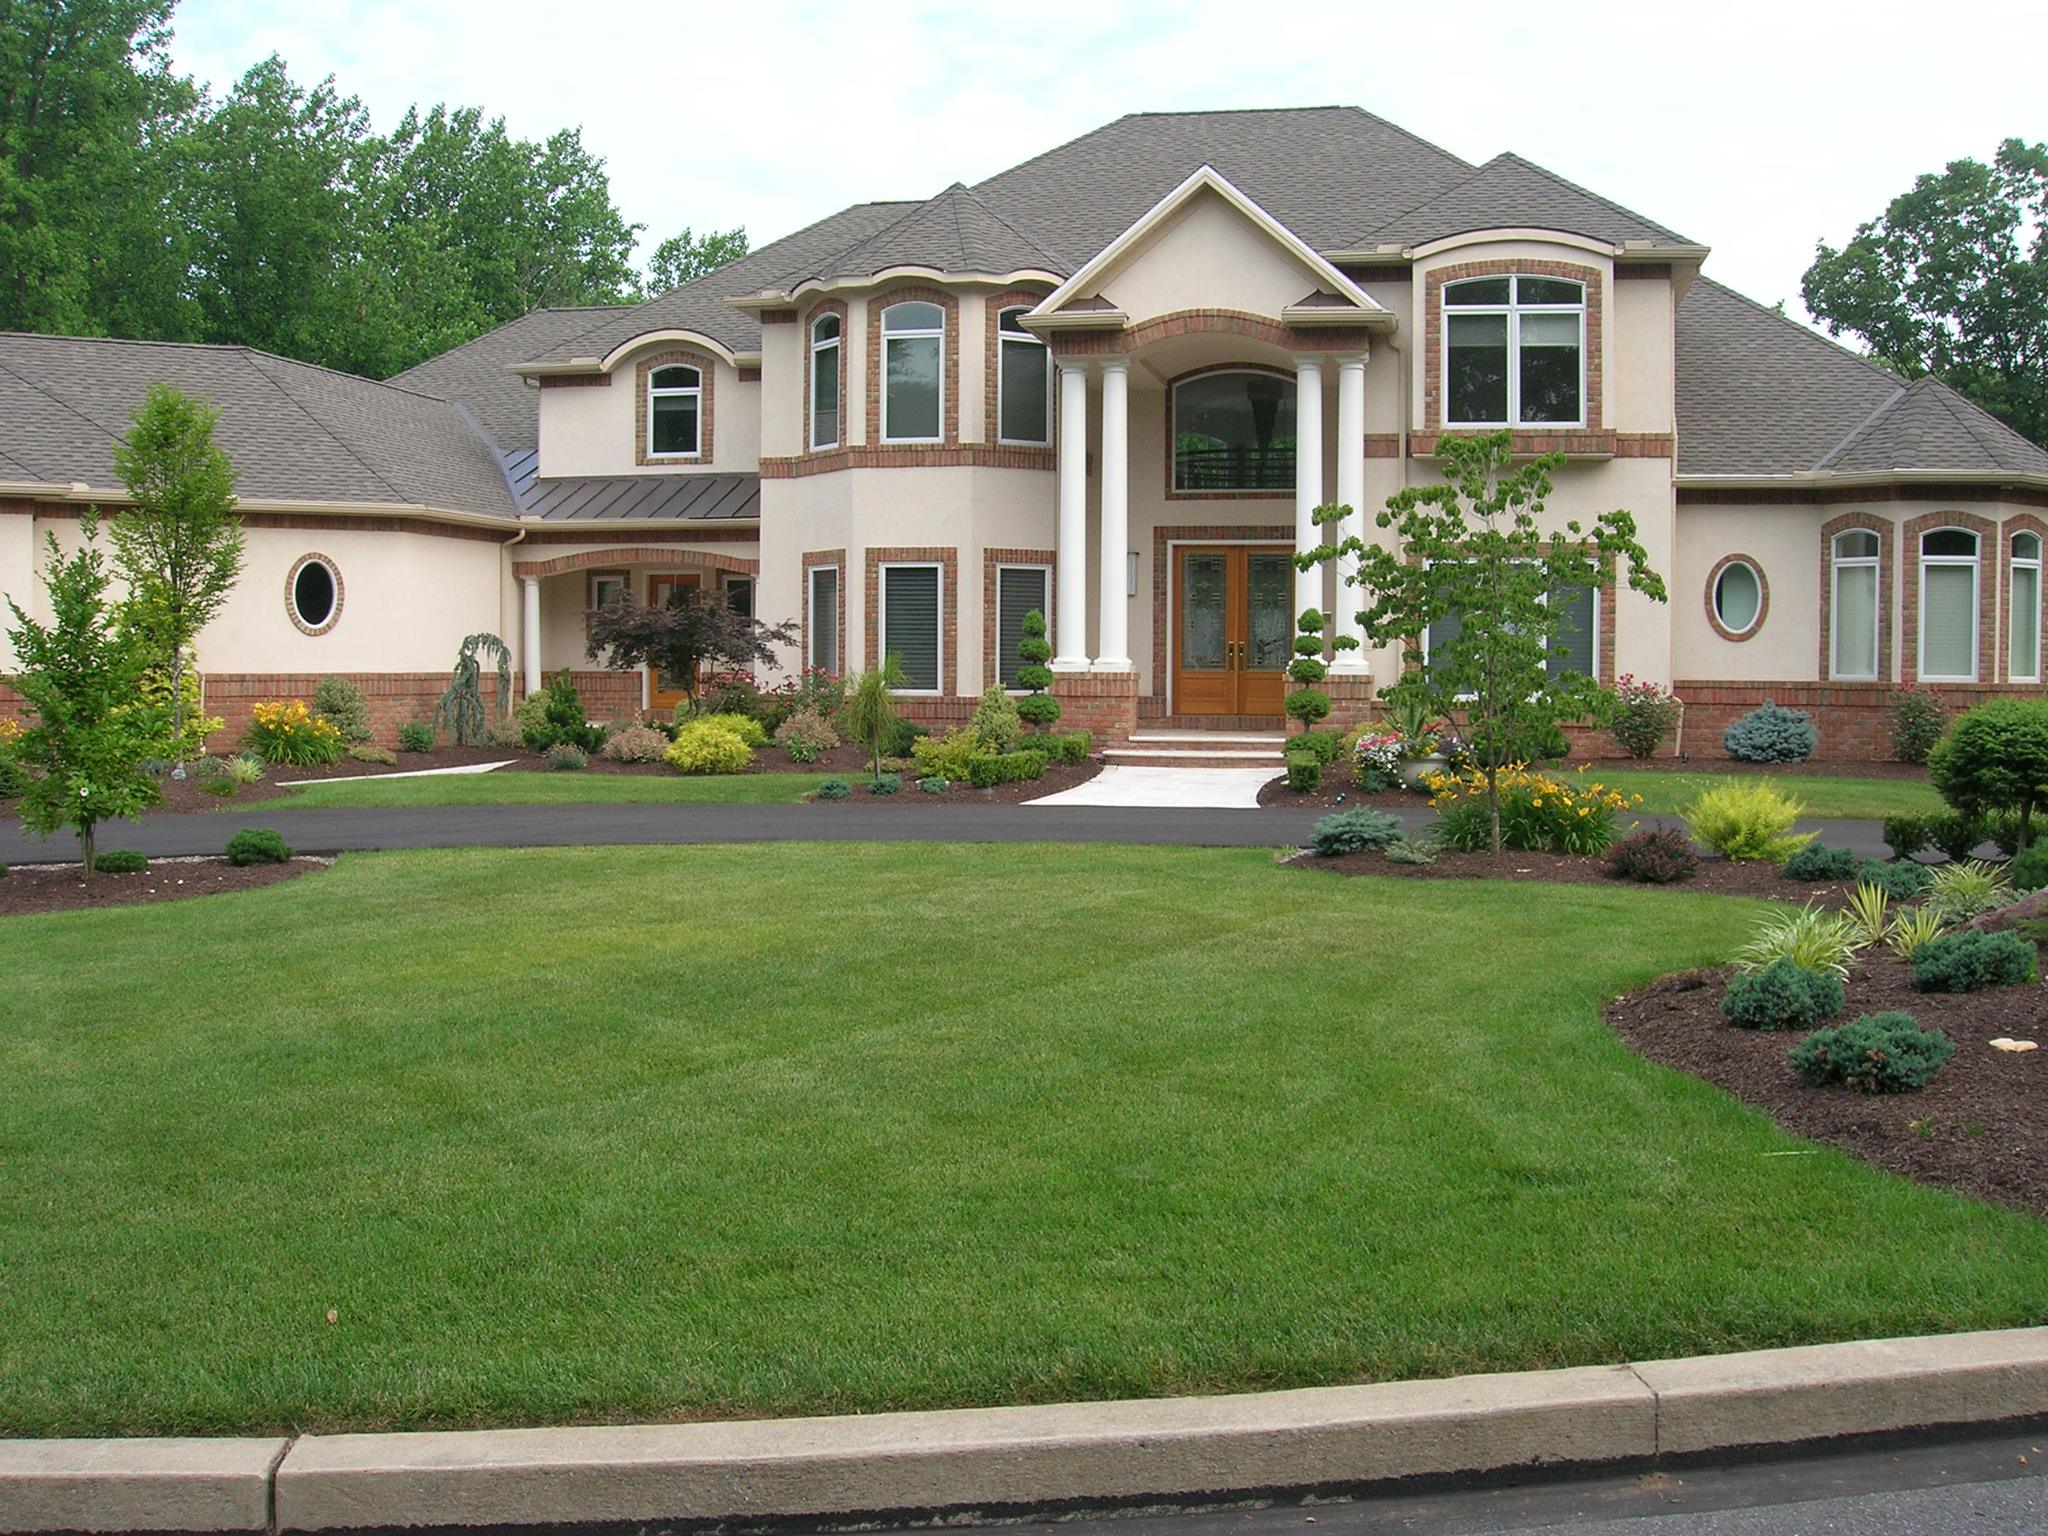 Lawn and Landscaping Services